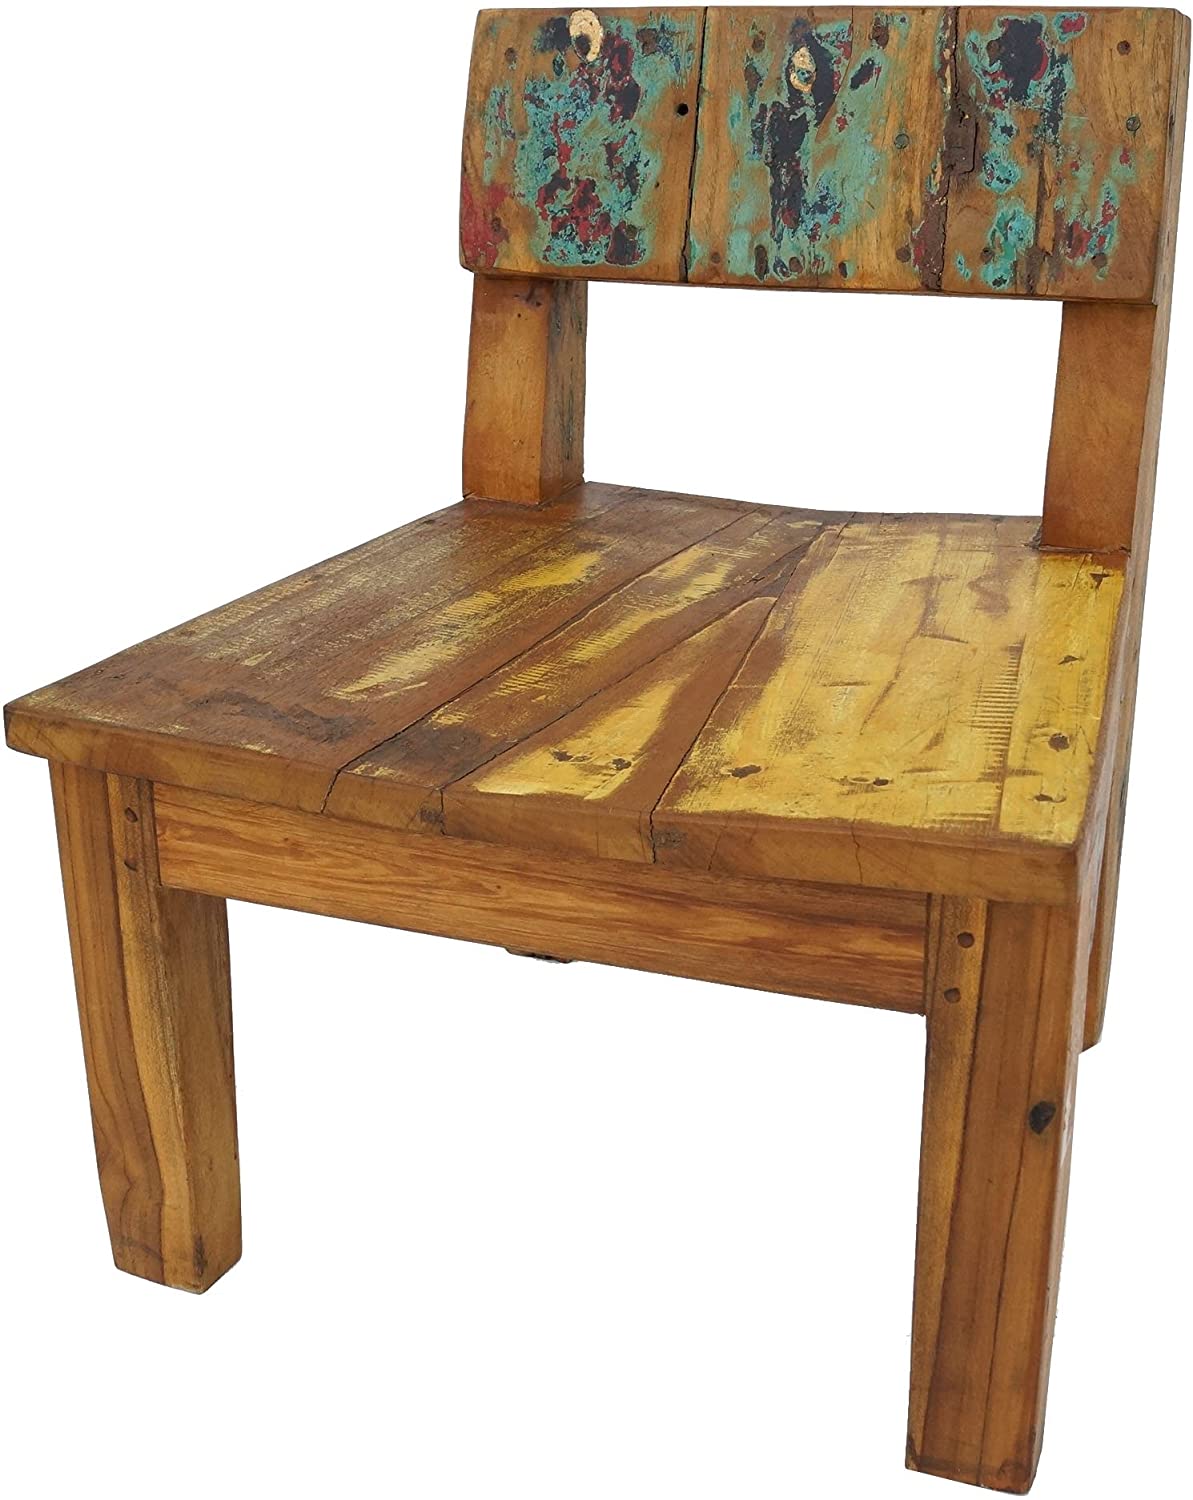 Chair Made from Reclaimed Teak Wood/Chairs & bar stool